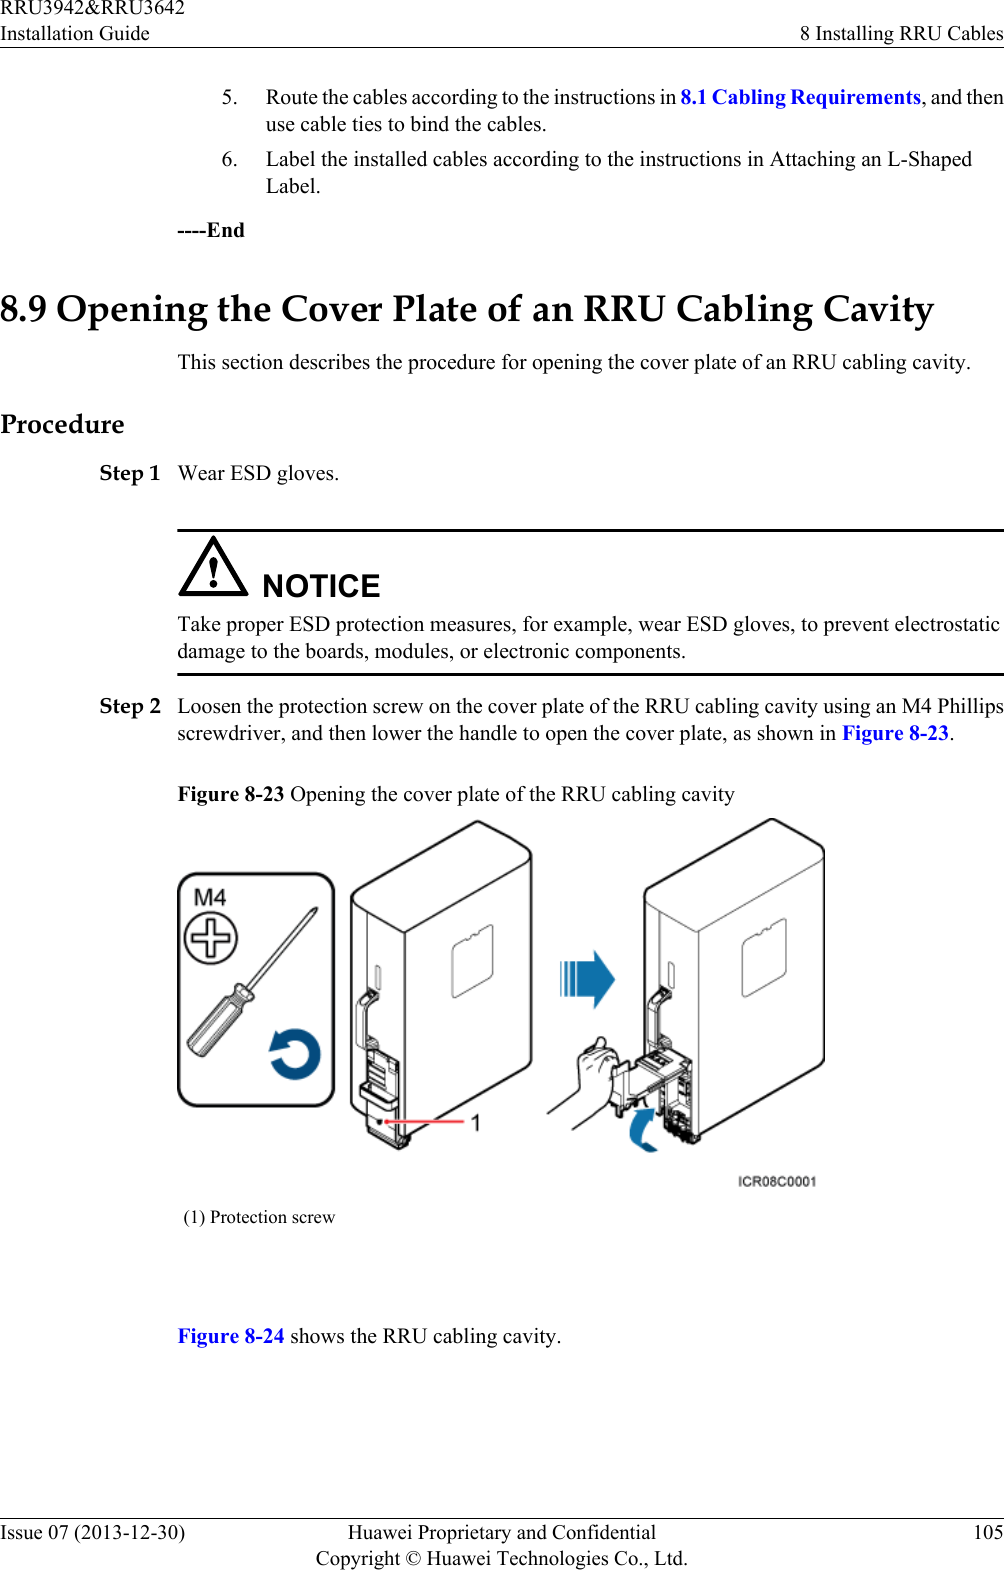 5. Route the cables according to the instructions in 8.1 Cabling Requirements, and thenuse cable ties to bind the cables.6. Label the installed cables according to the instructions in Attaching an L-ShapedLabel.----End8.9 Opening the Cover Plate of an RRU Cabling CavityThis section describes the procedure for opening the cover plate of an RRU cabling cavity.ProcedureStep 1 Wear ESD gloves.NOTICETake proper ESD protection measures, for example, wear ESD gloves, to prevent electrostaticdamage to the boards, modules, or electronic components.Step 2 Loosen the protection screw on the cover plate of the RRU cabling cavity using an M4 Phillipsscrewdriver, and then lower the handle to open the cover plate, as shown in Figure 8-23.Figure 8-23 Opening the cover plate of the RRU cabling cavity(1) Protection screw Figure 8-24 shows the RRU cabling cavity.RRU3942&amp;RRU3642Installation Guide 8 Installing RRU CablesIssue 07 (2013-12-30) Huawei Proprietary and ConfidentialCopyright © Huawei Technologies Co., Ltd.105